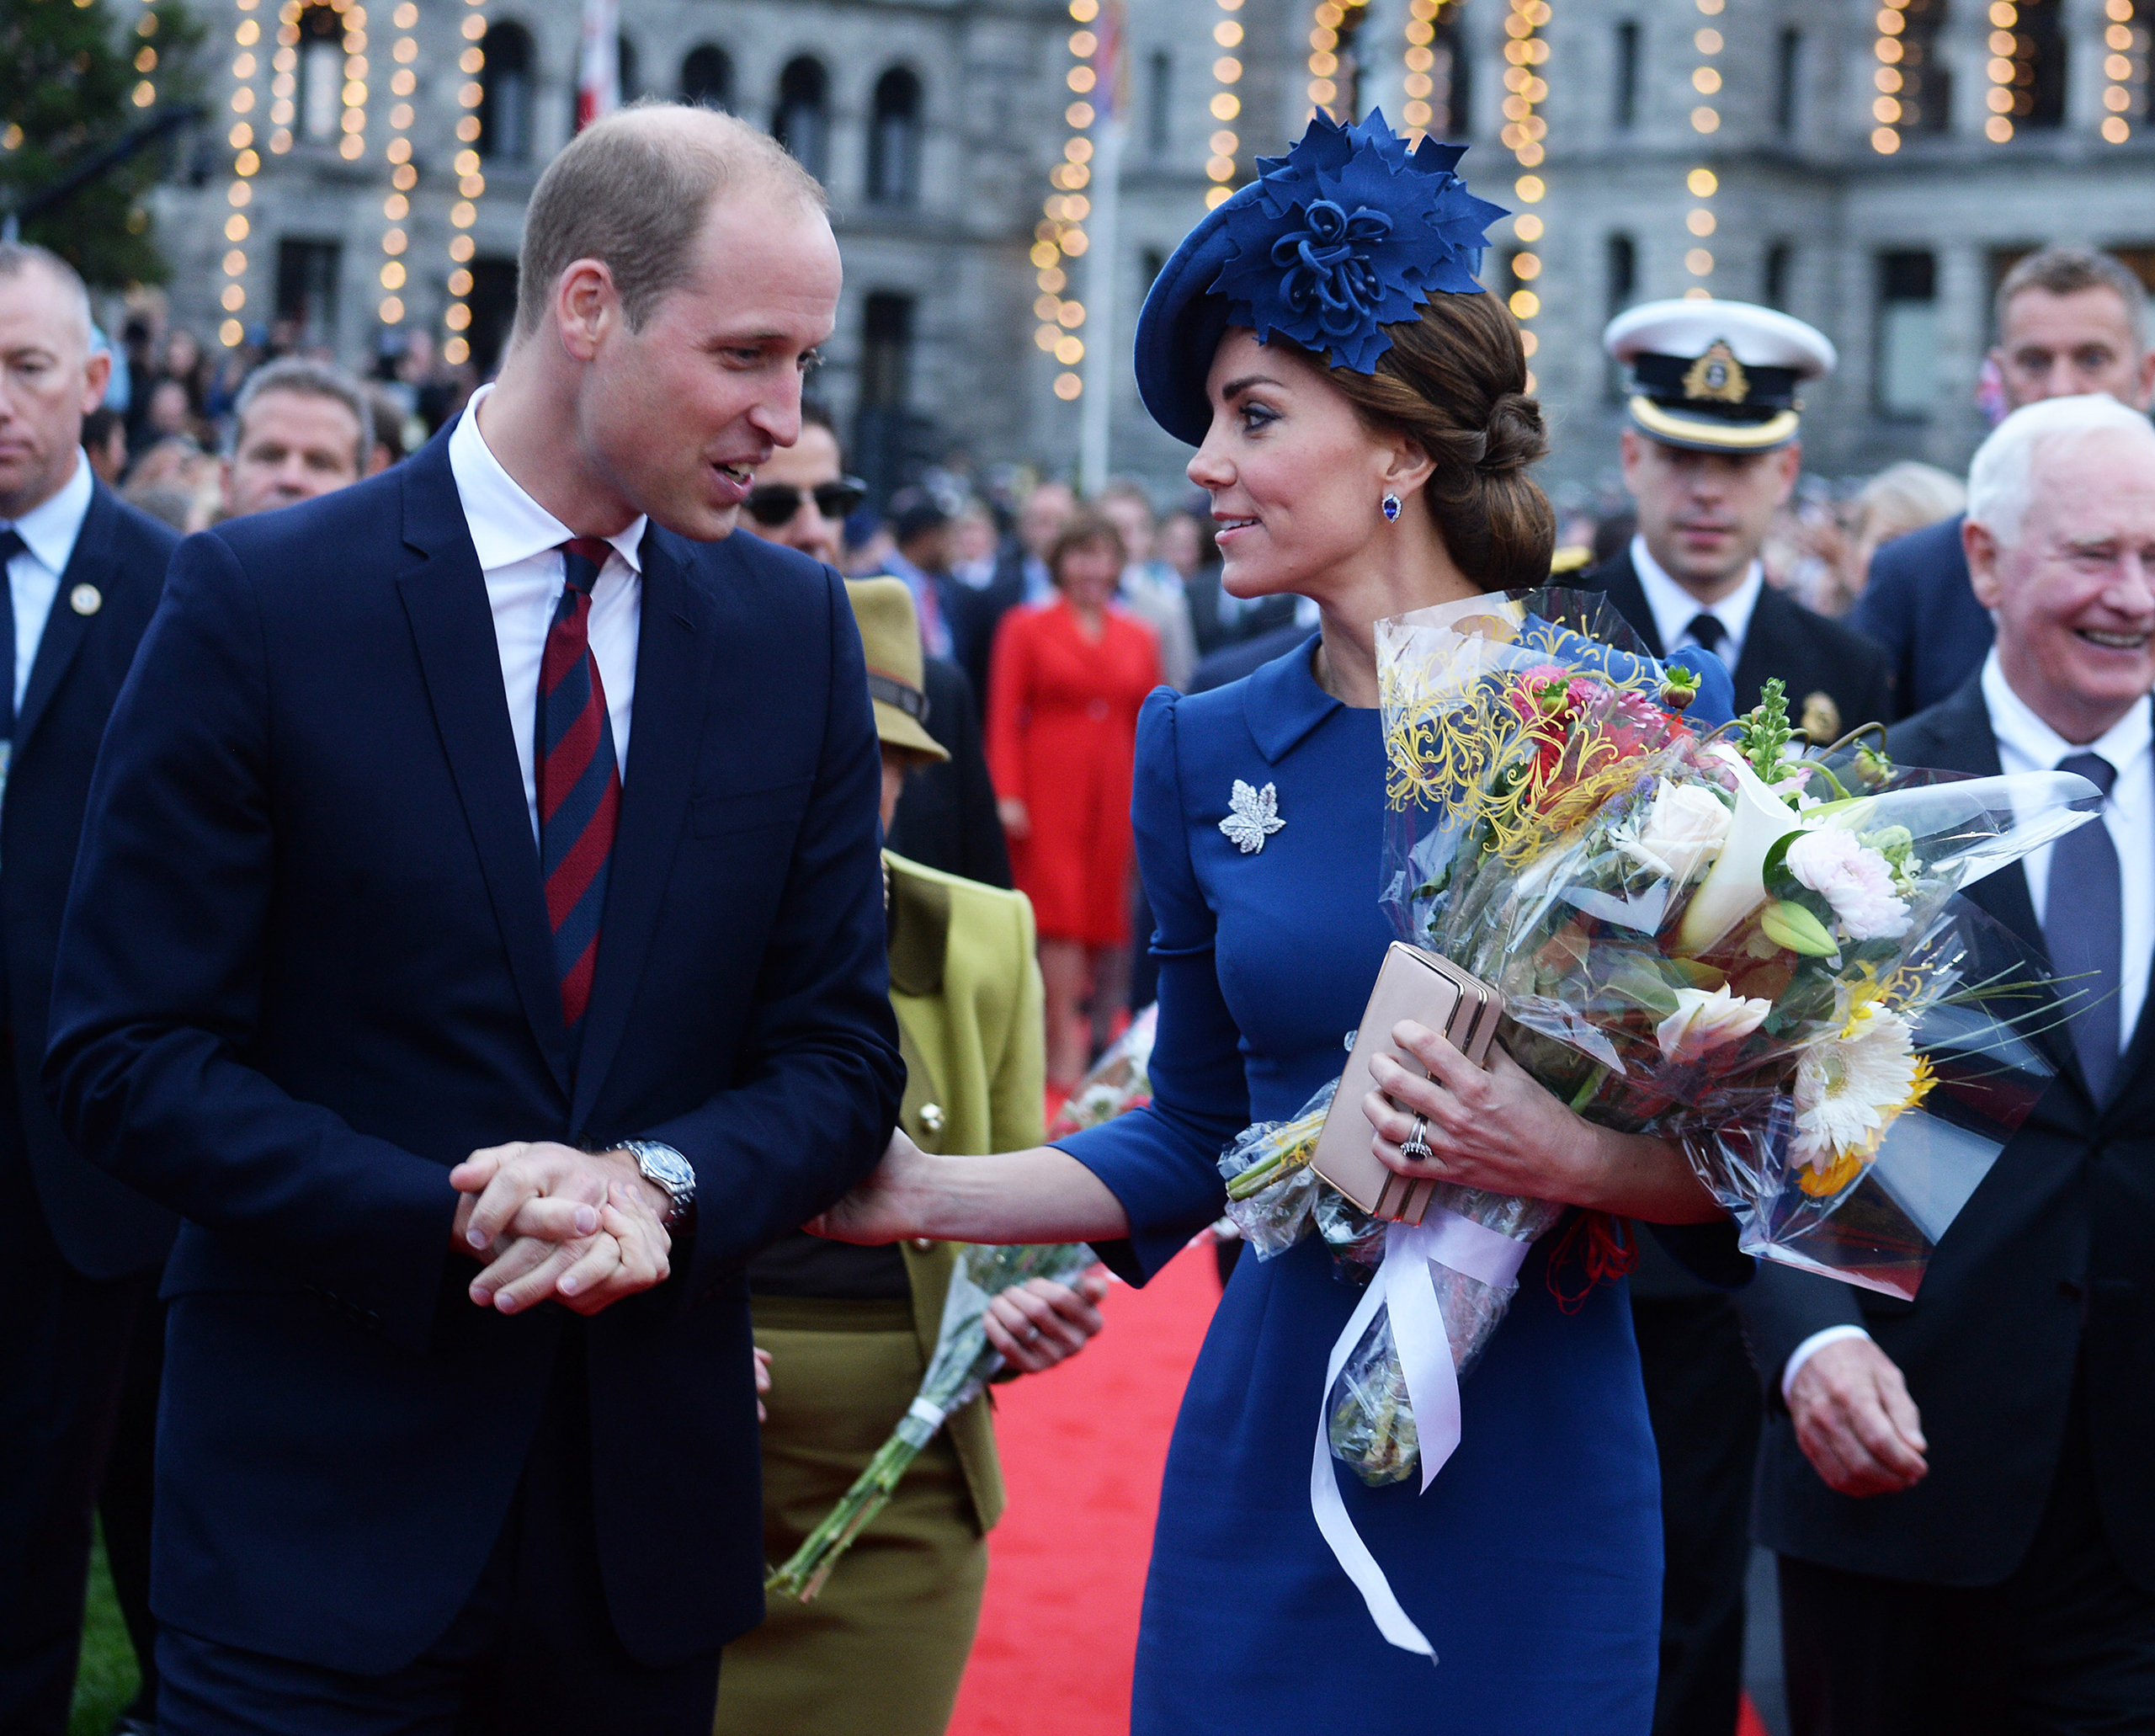 Prince William, Duke of Cambridge, and Catherine, Duchess of Cambridge, attend the Official Welcome Ceremony for the Royal Tour at the British Columbia Legislature in Victoria, Canada, on Sept. 24, 2016.